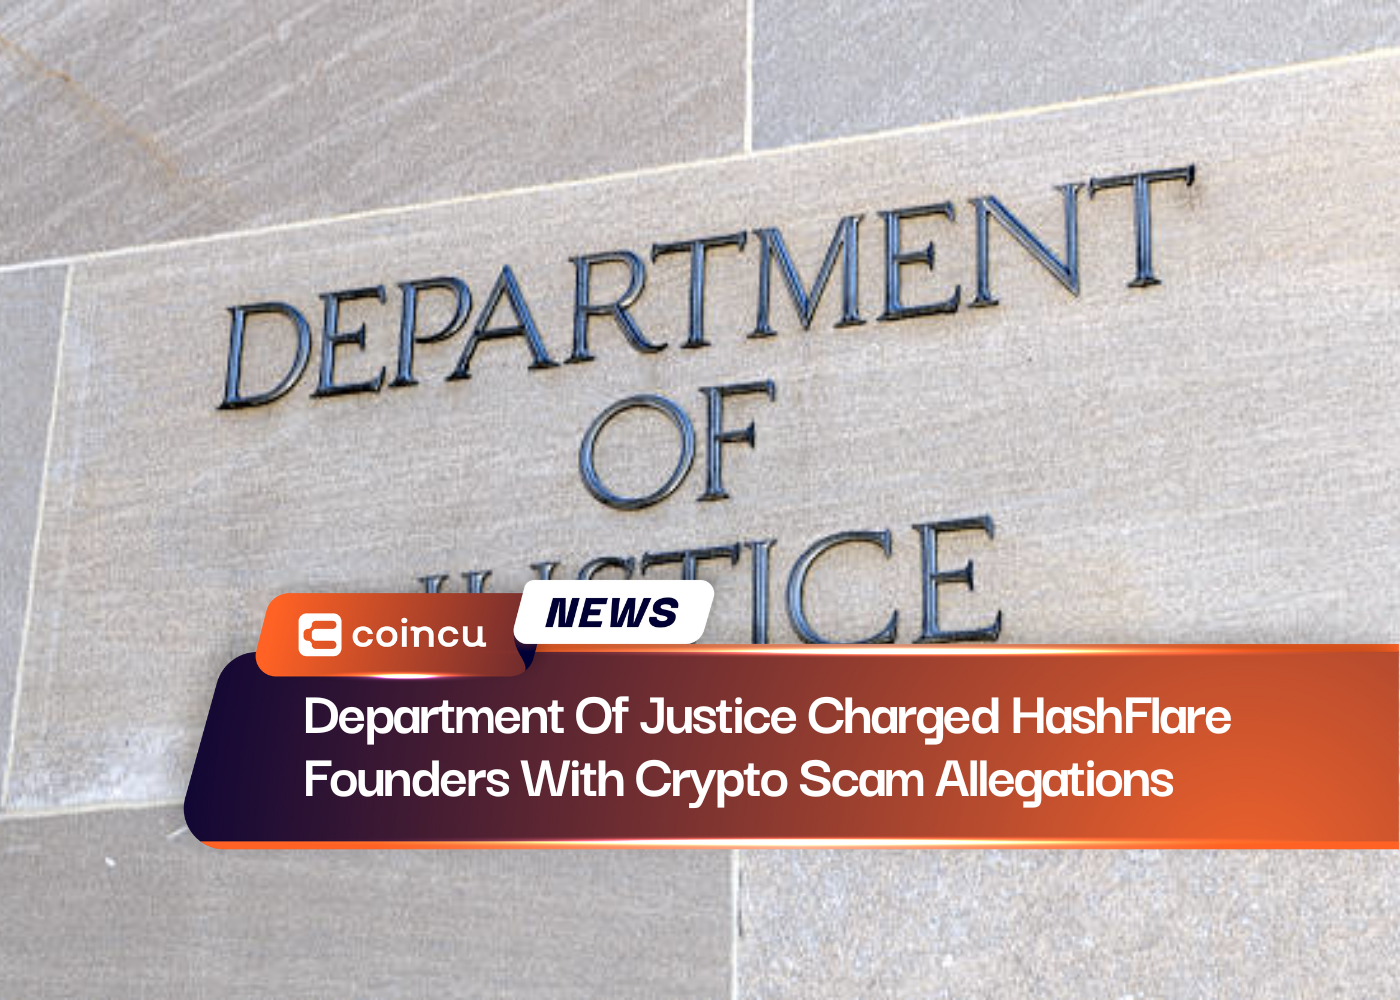 Department Of Justice Charged HashFlare Founders With Crypto Scam Allegations